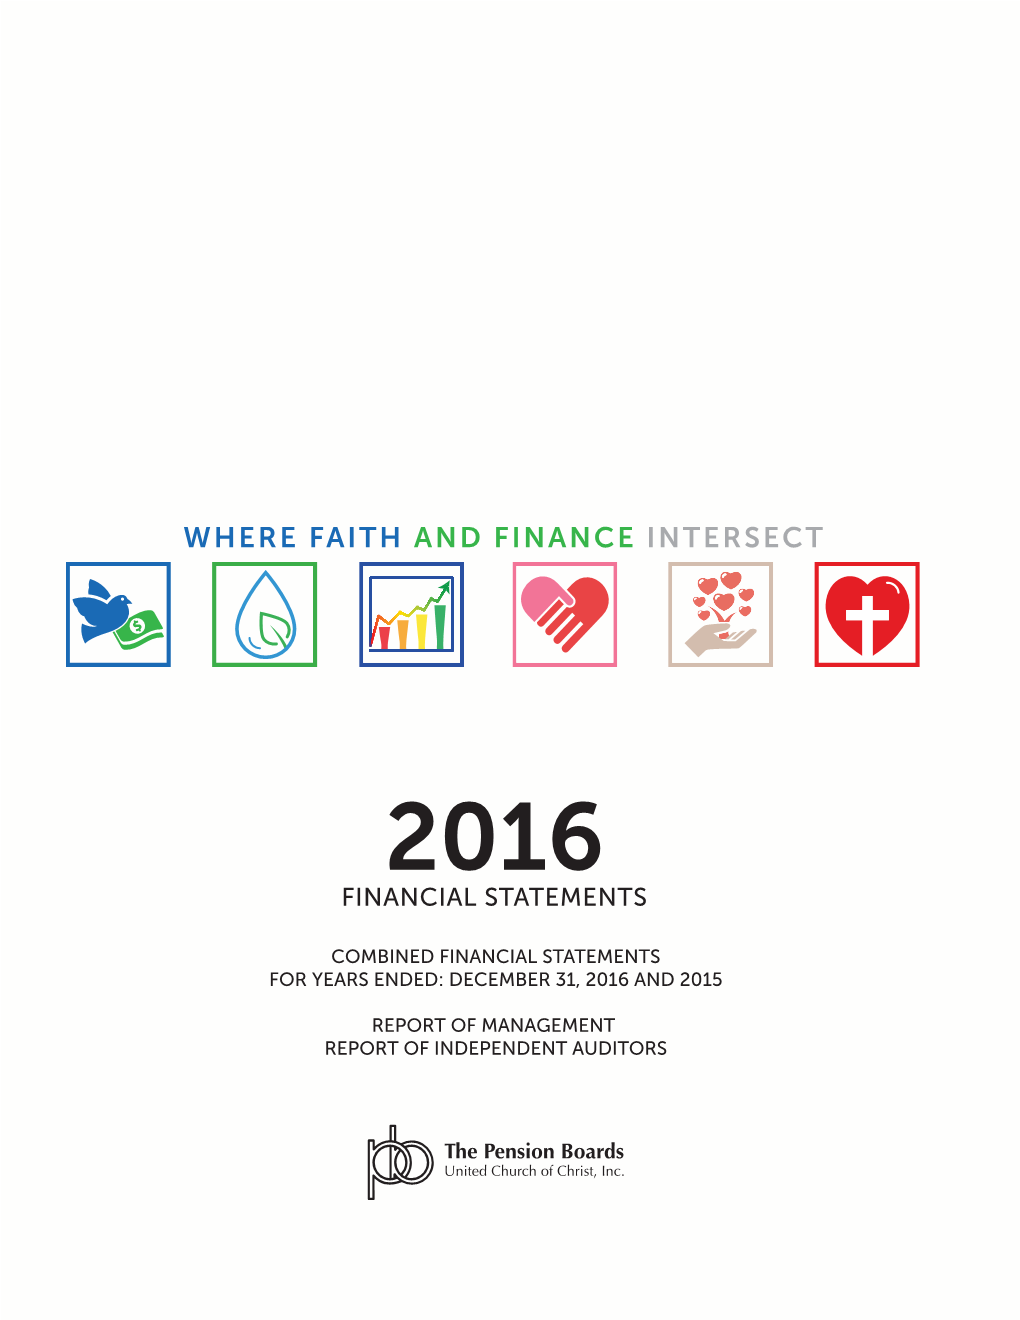 Where Faith and Finance Intersect